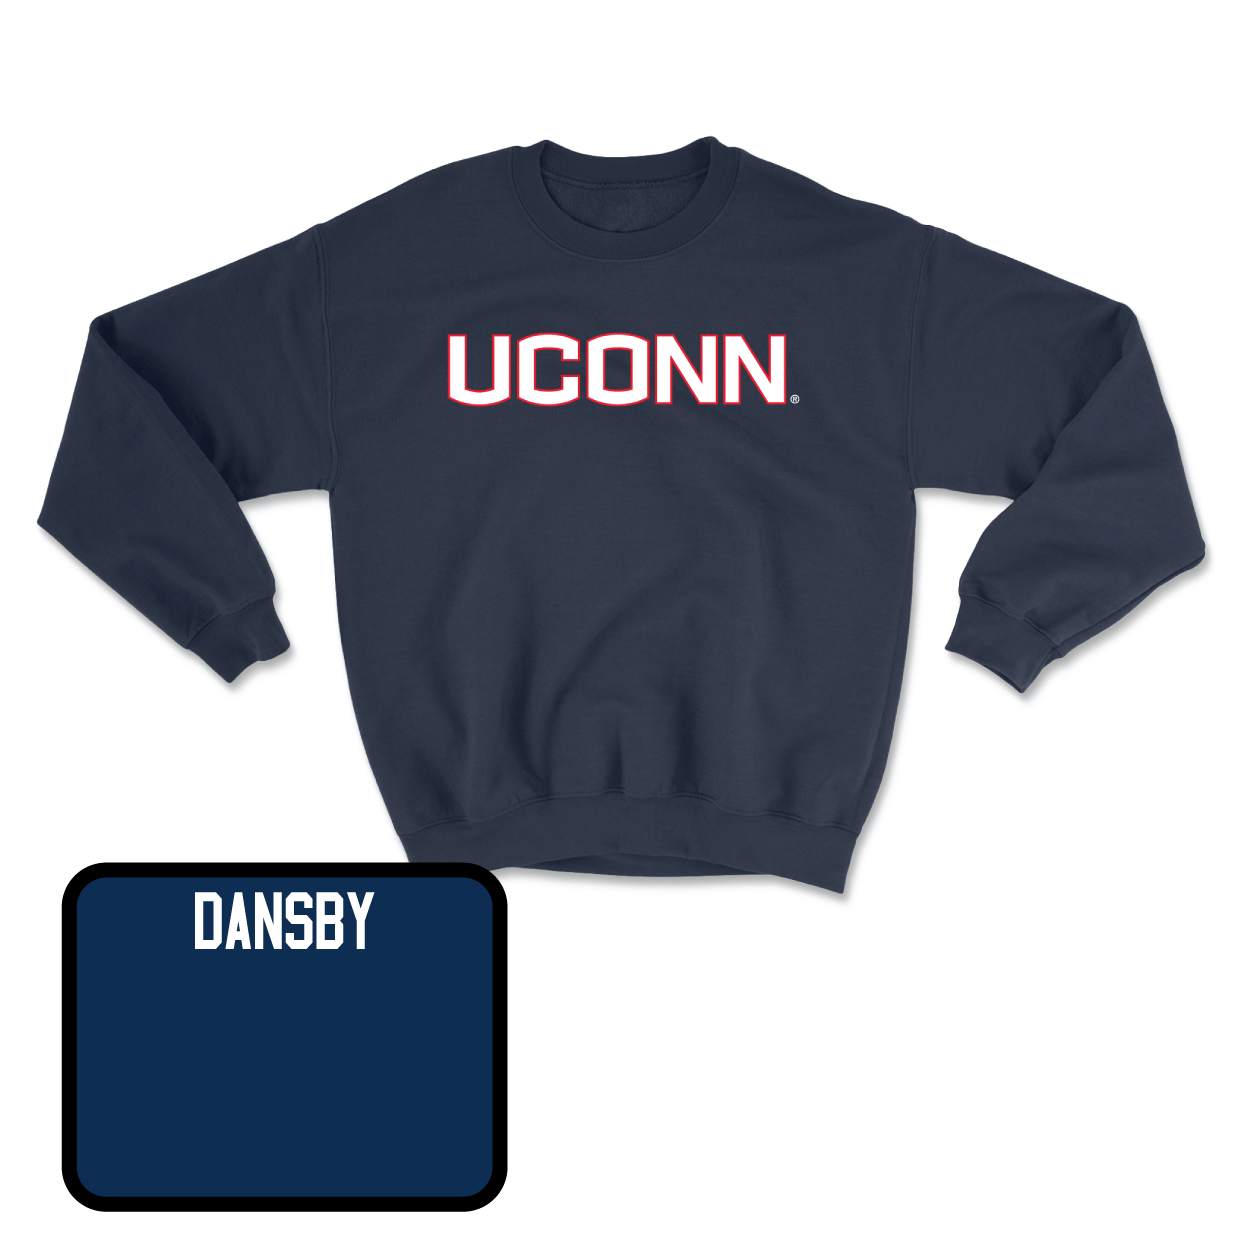 Navy Women's Track & Field UConn Crewneck 3X-Large / Mia Dansby